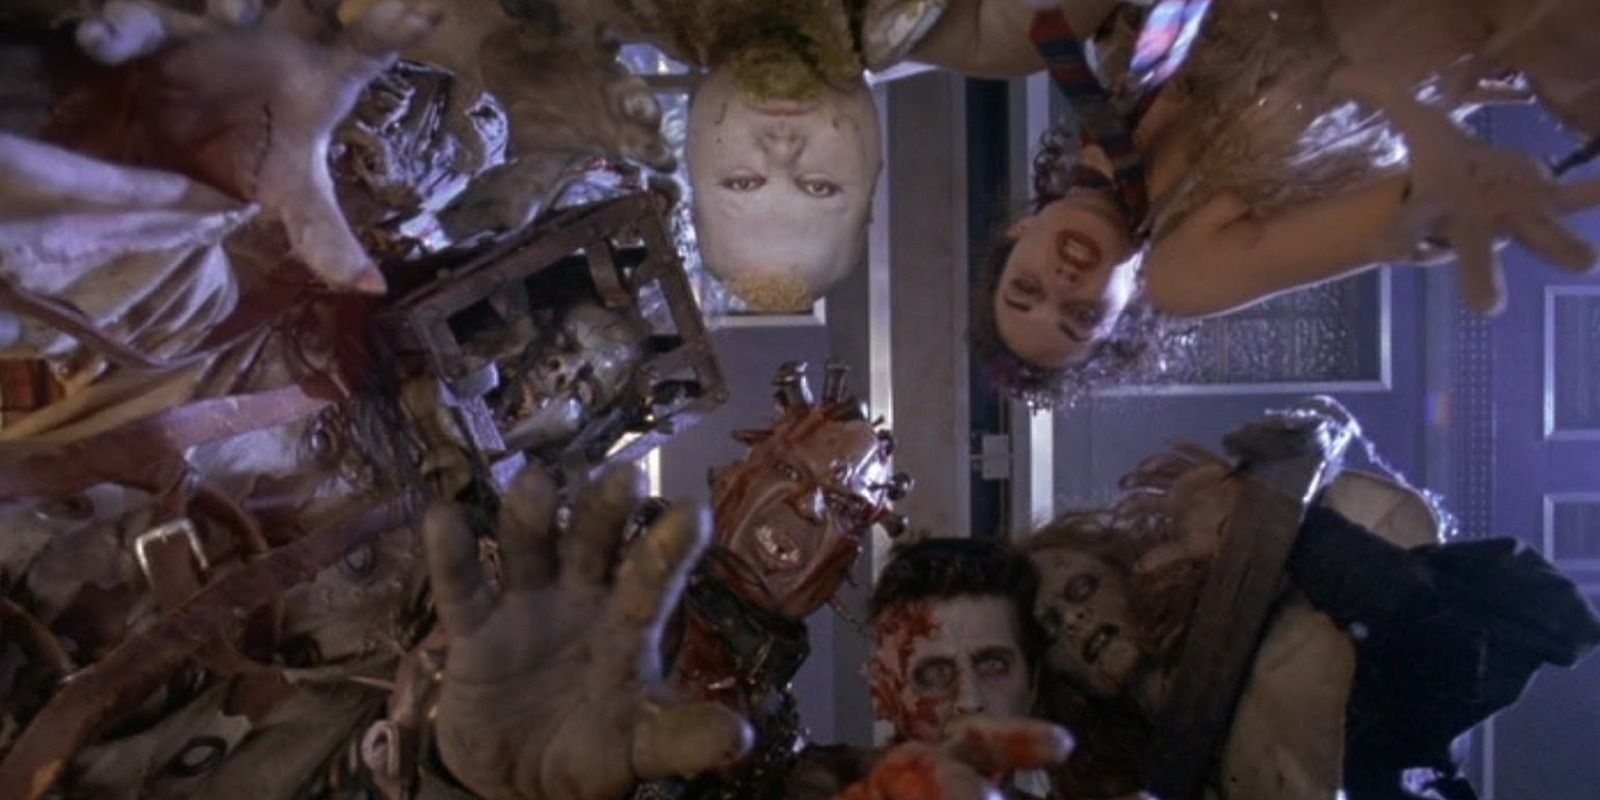 Each of the 13 ghosts standing around the antagonist